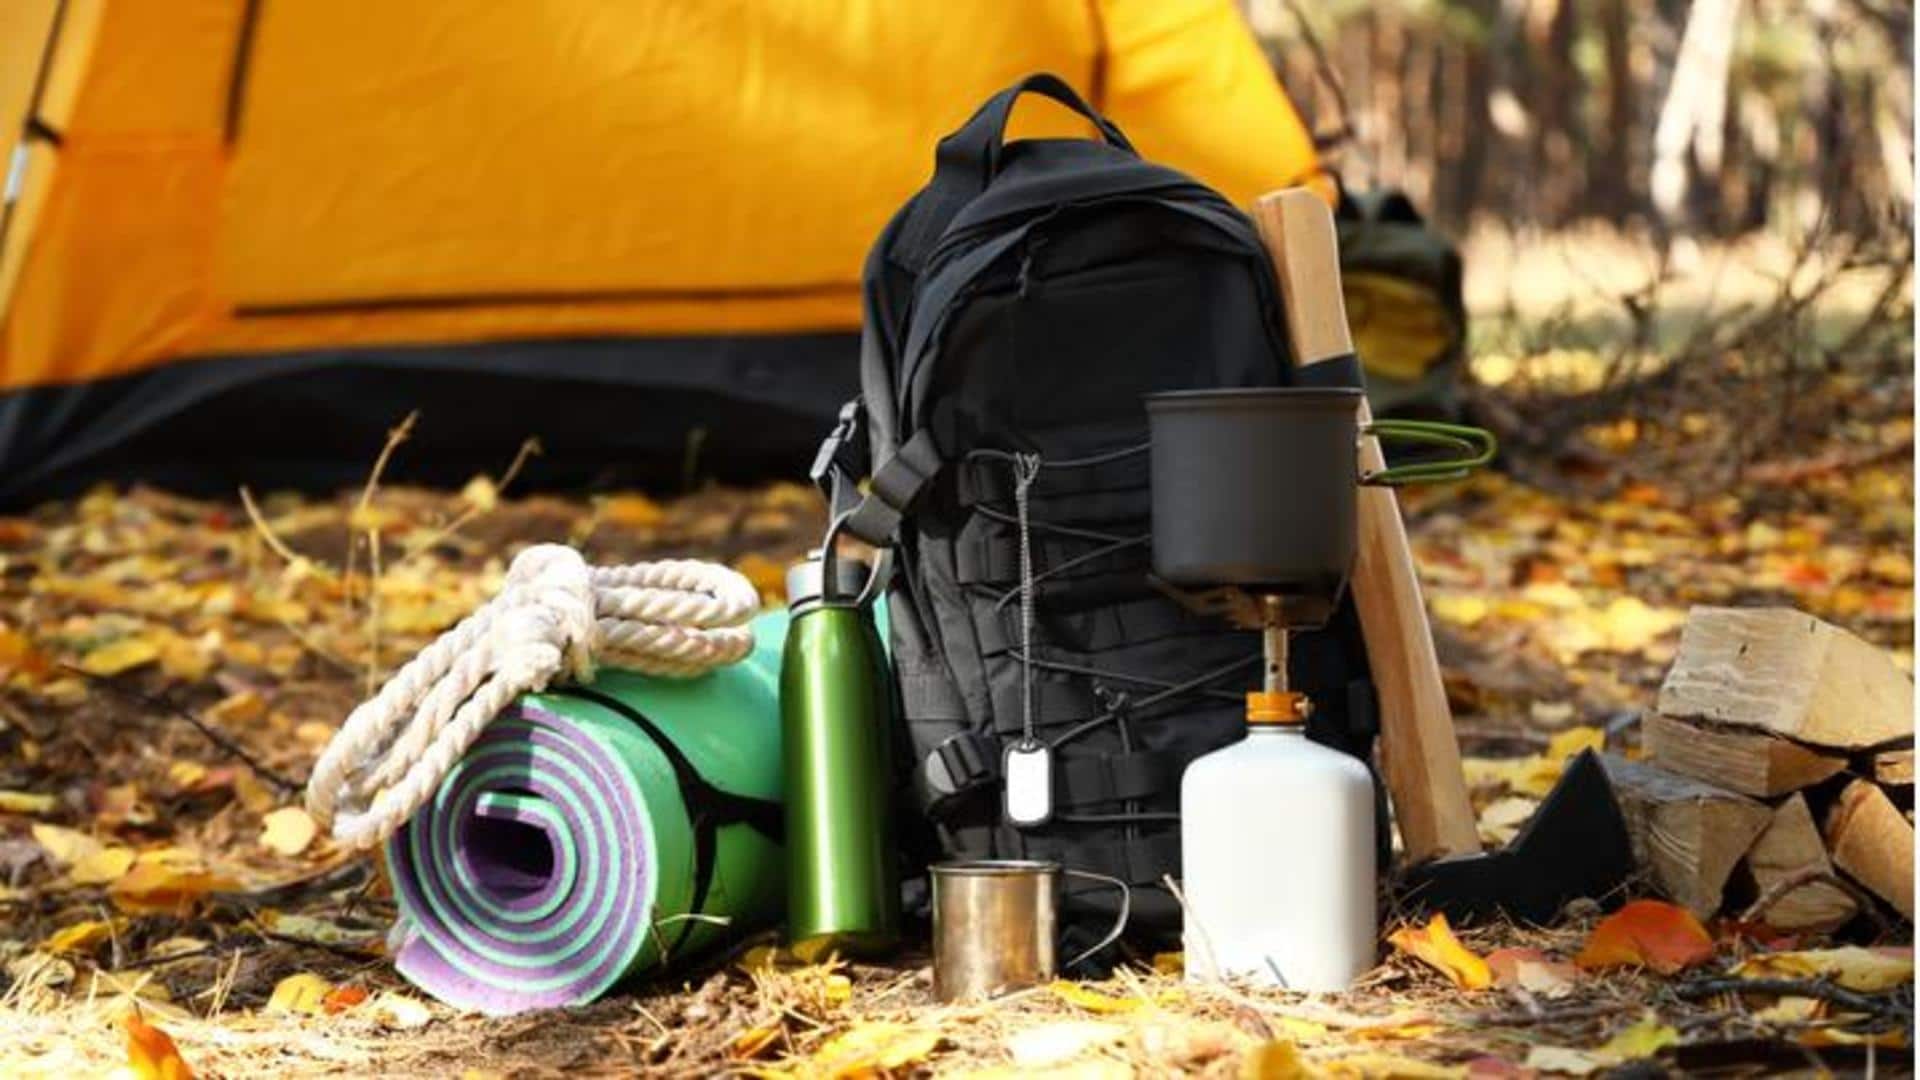 Going camping? Make sure you pack these essentials